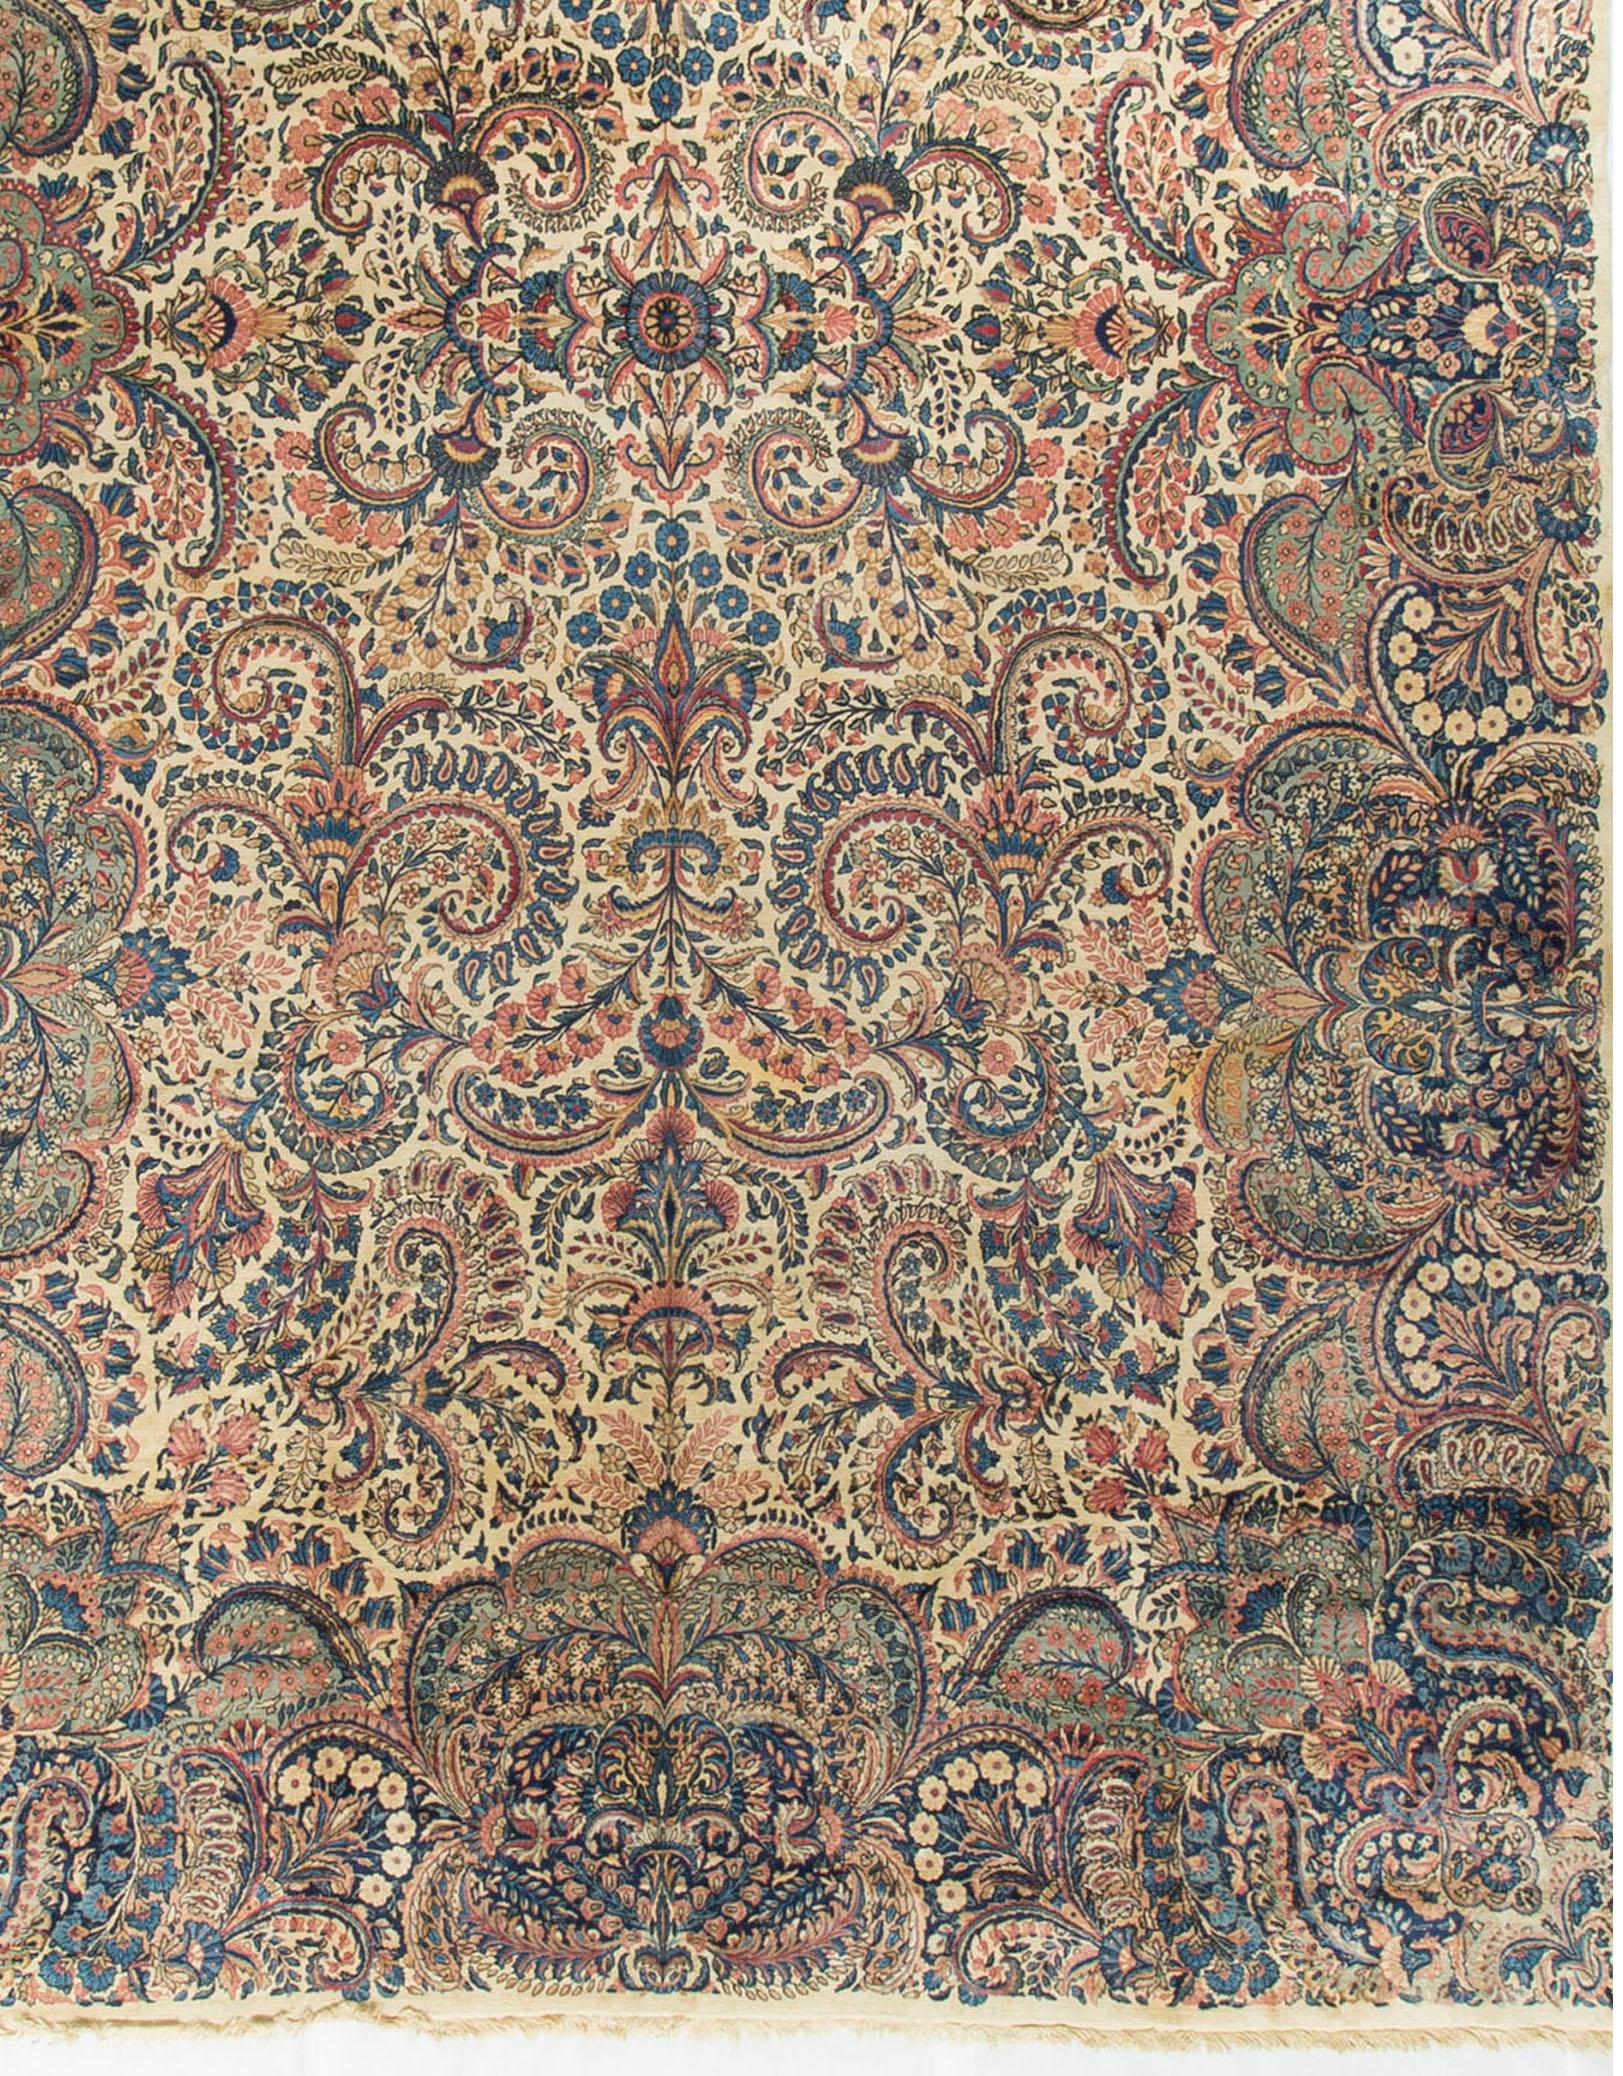 Oversize Persian Kerman rug carpet, circa 1930. A vintage, circa 1930s Kerman rug from Persia. This wonderful piece is full to overflowing with wonderful floral designs and swirls that are so synonymous with rugs from this area. The border is not of